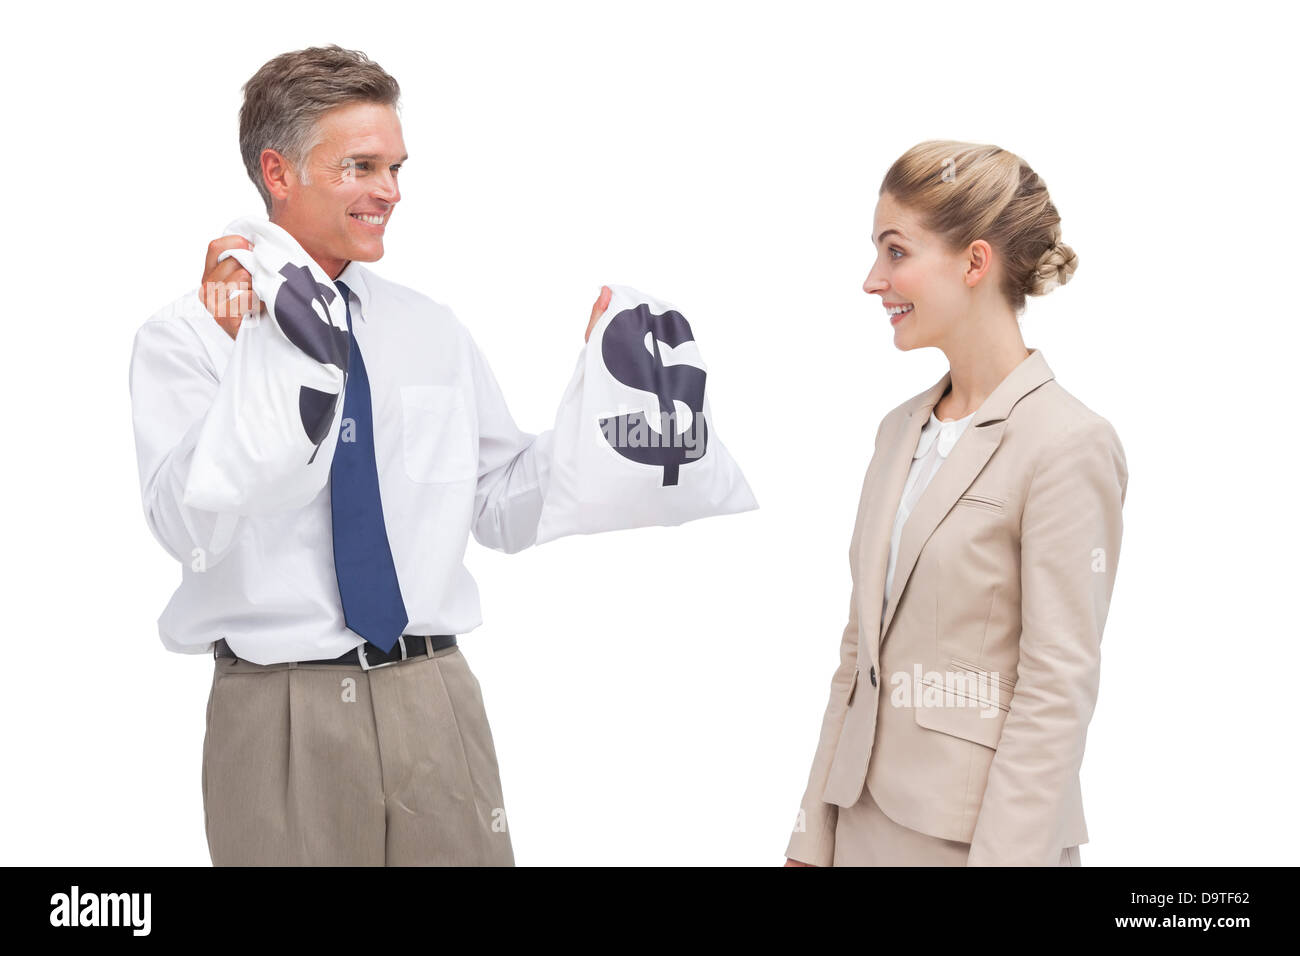 Smiling mature businessman showing money bags to his coworker Stock Photo